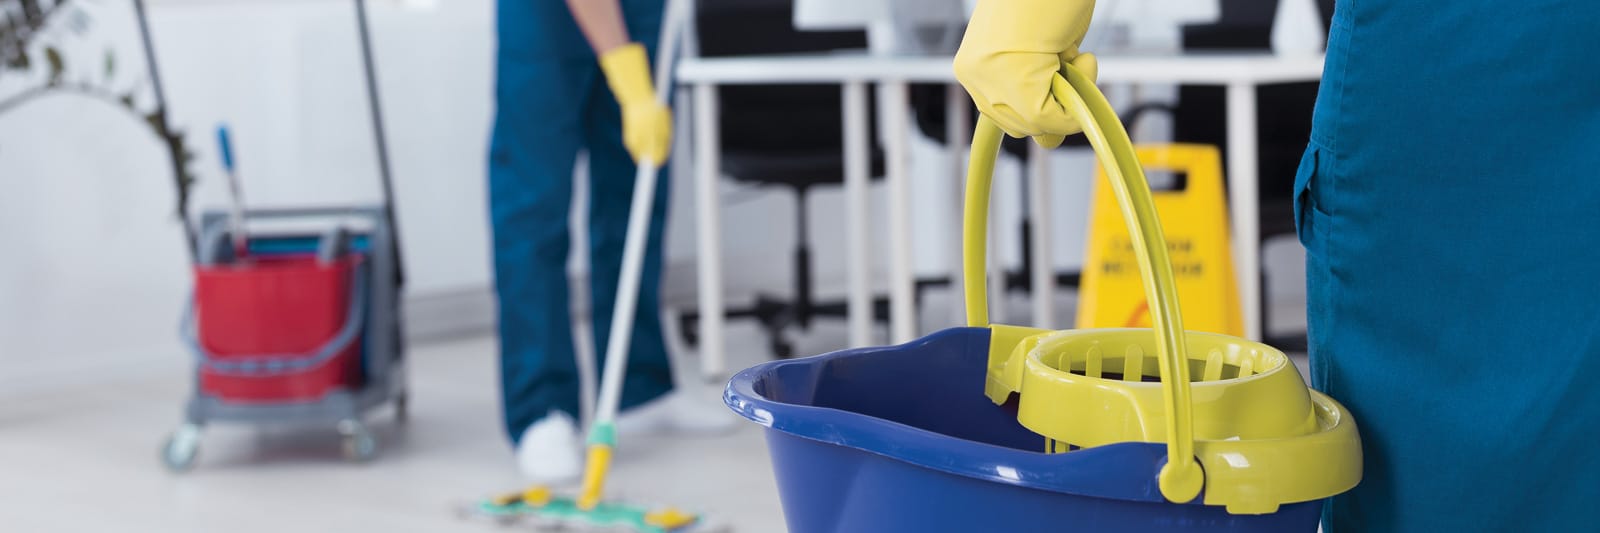 monthind_professional_janitorial_and_cleaning_supplies